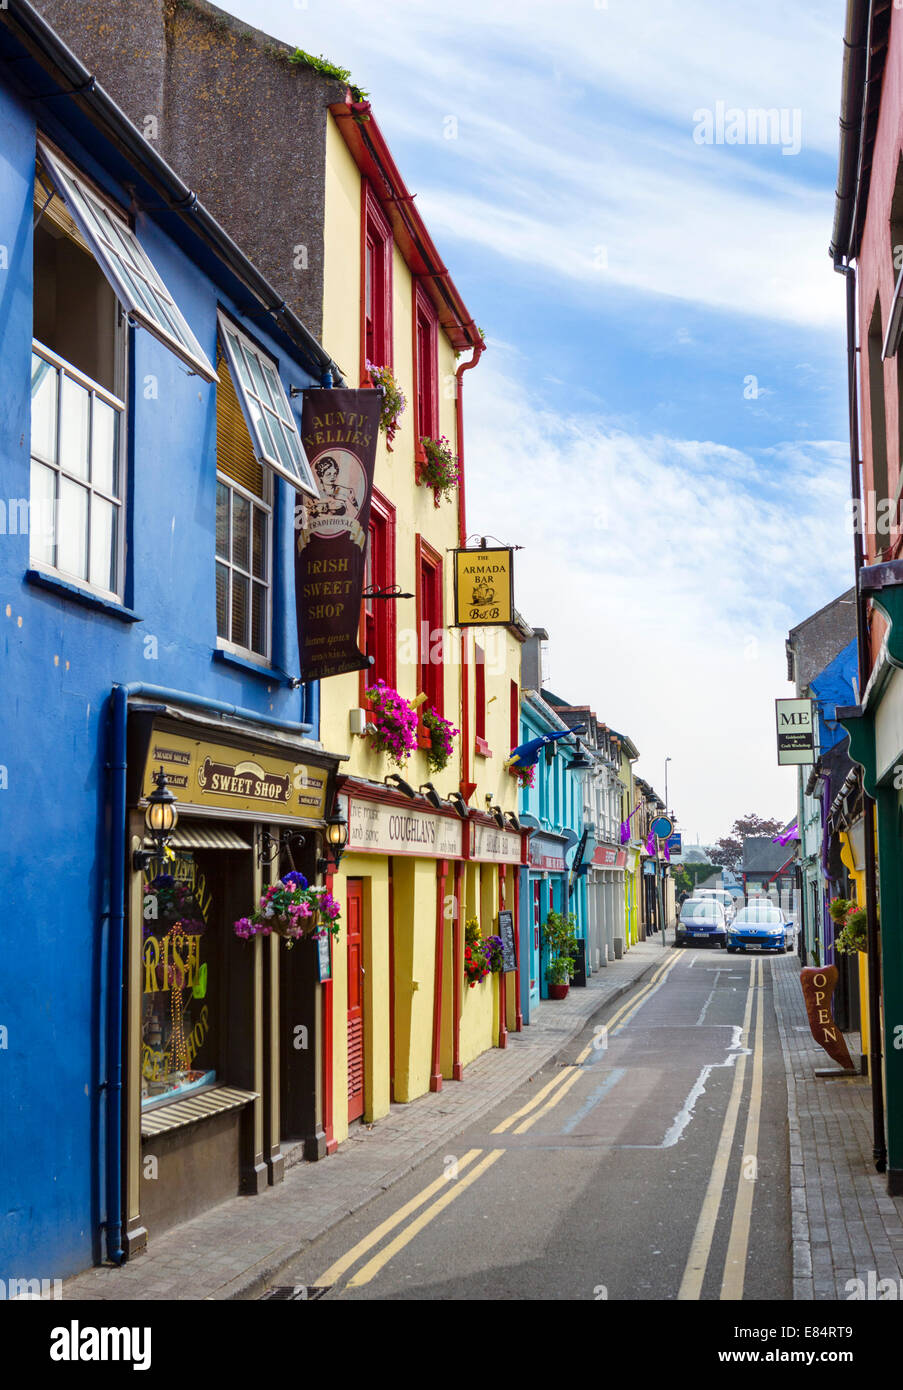 Shops and bars on Market Lane in the town centre, Kinsale, County Cork, Republic of Ireland Stock Photo